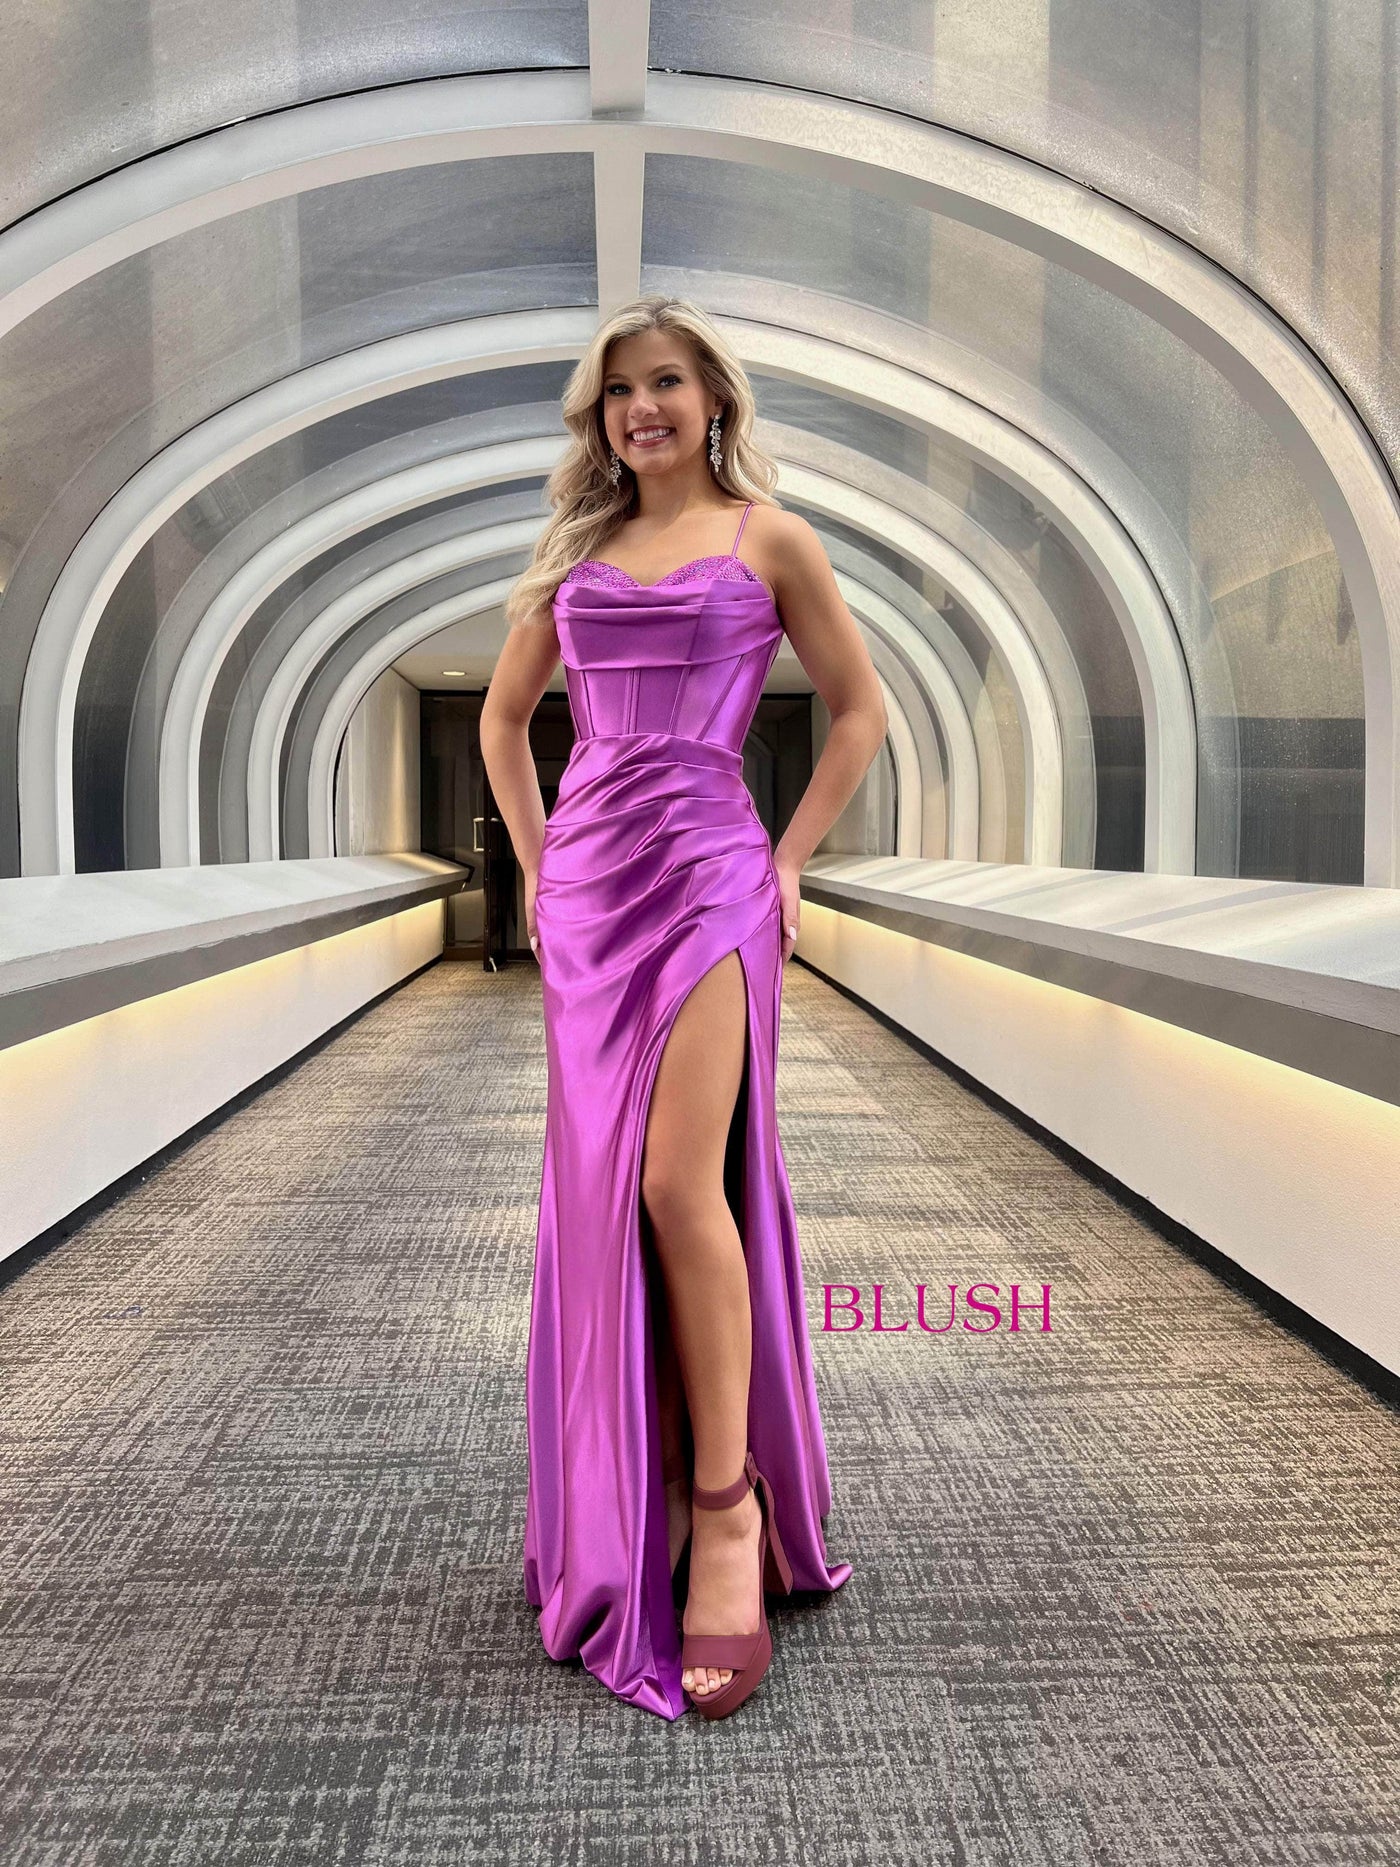 Blush by Alexia Designs 12134 - Sweetheart Corset Prom DressSpecial Occasion Dress